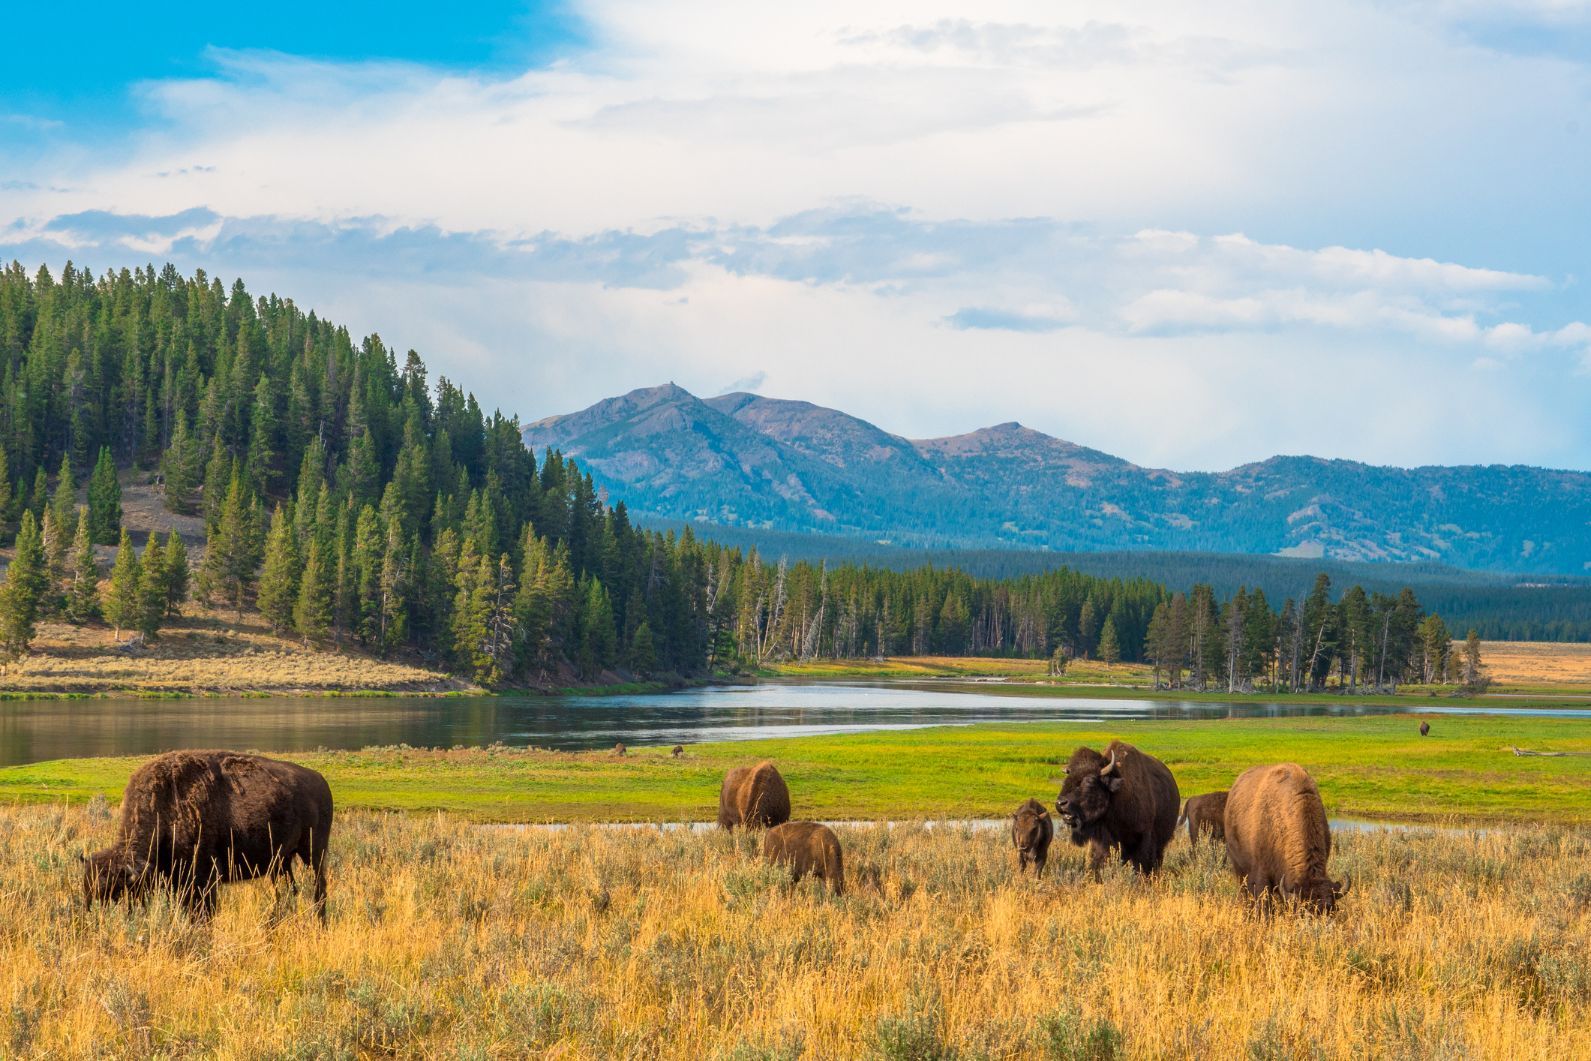 Buffalos grazing at Hayden Valley in Yellowstone National Park, Wyoming